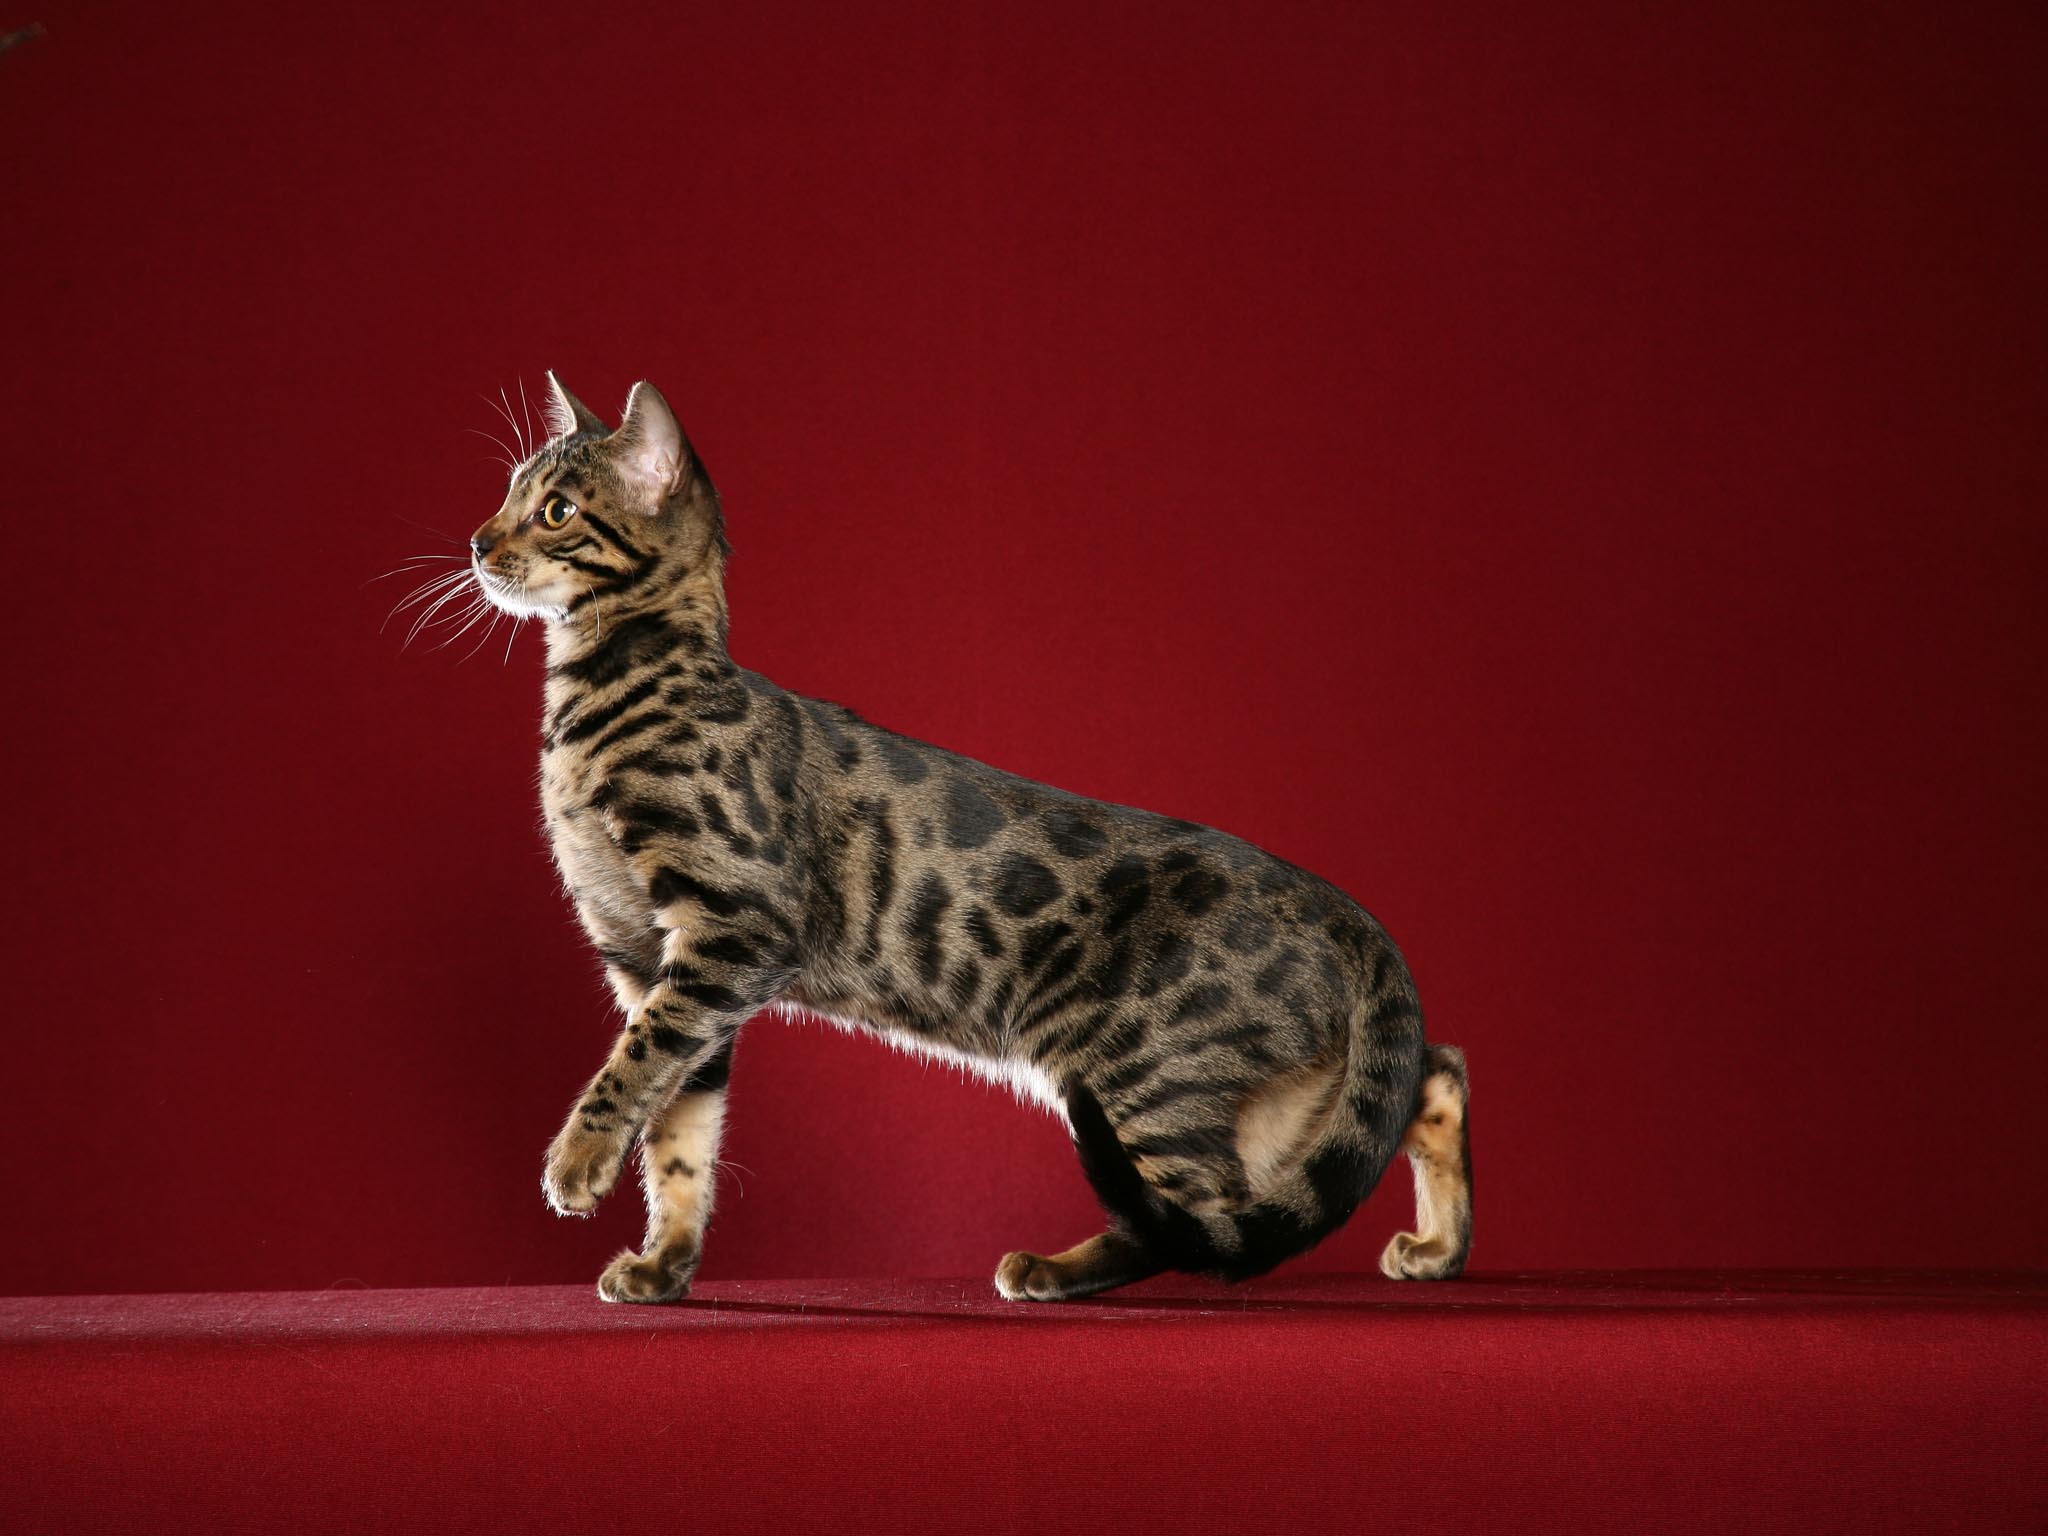 Bengal Cats Wallpaper. Daily inspiration art photo, picture